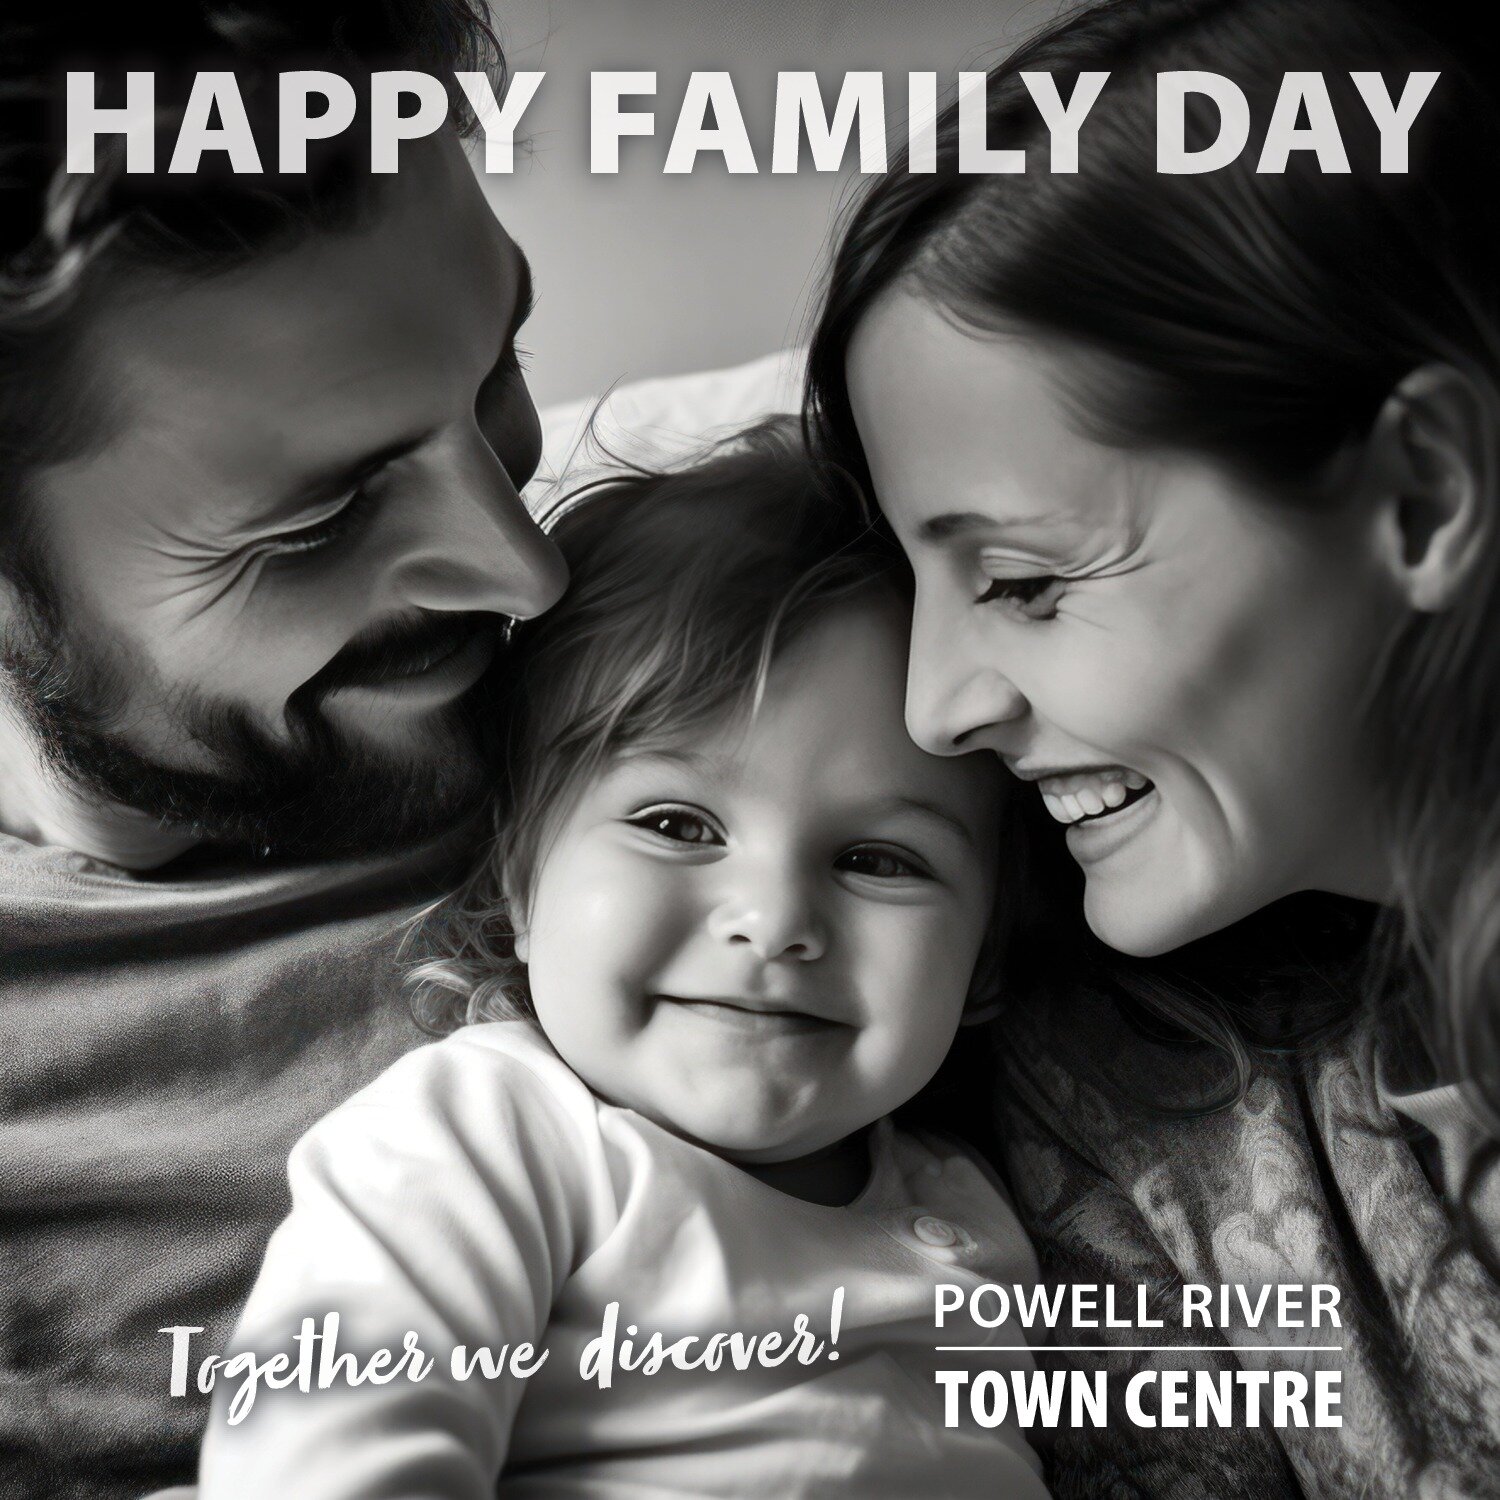 Happy Family Day from the Powell River Town Centre! 

Just a reminder that we will be closed, today (Monday, February 19th) and will re-open tomorrow, Tuesday, February 20th at 9:30am. Our administration office is also closed and will re-open tomorro